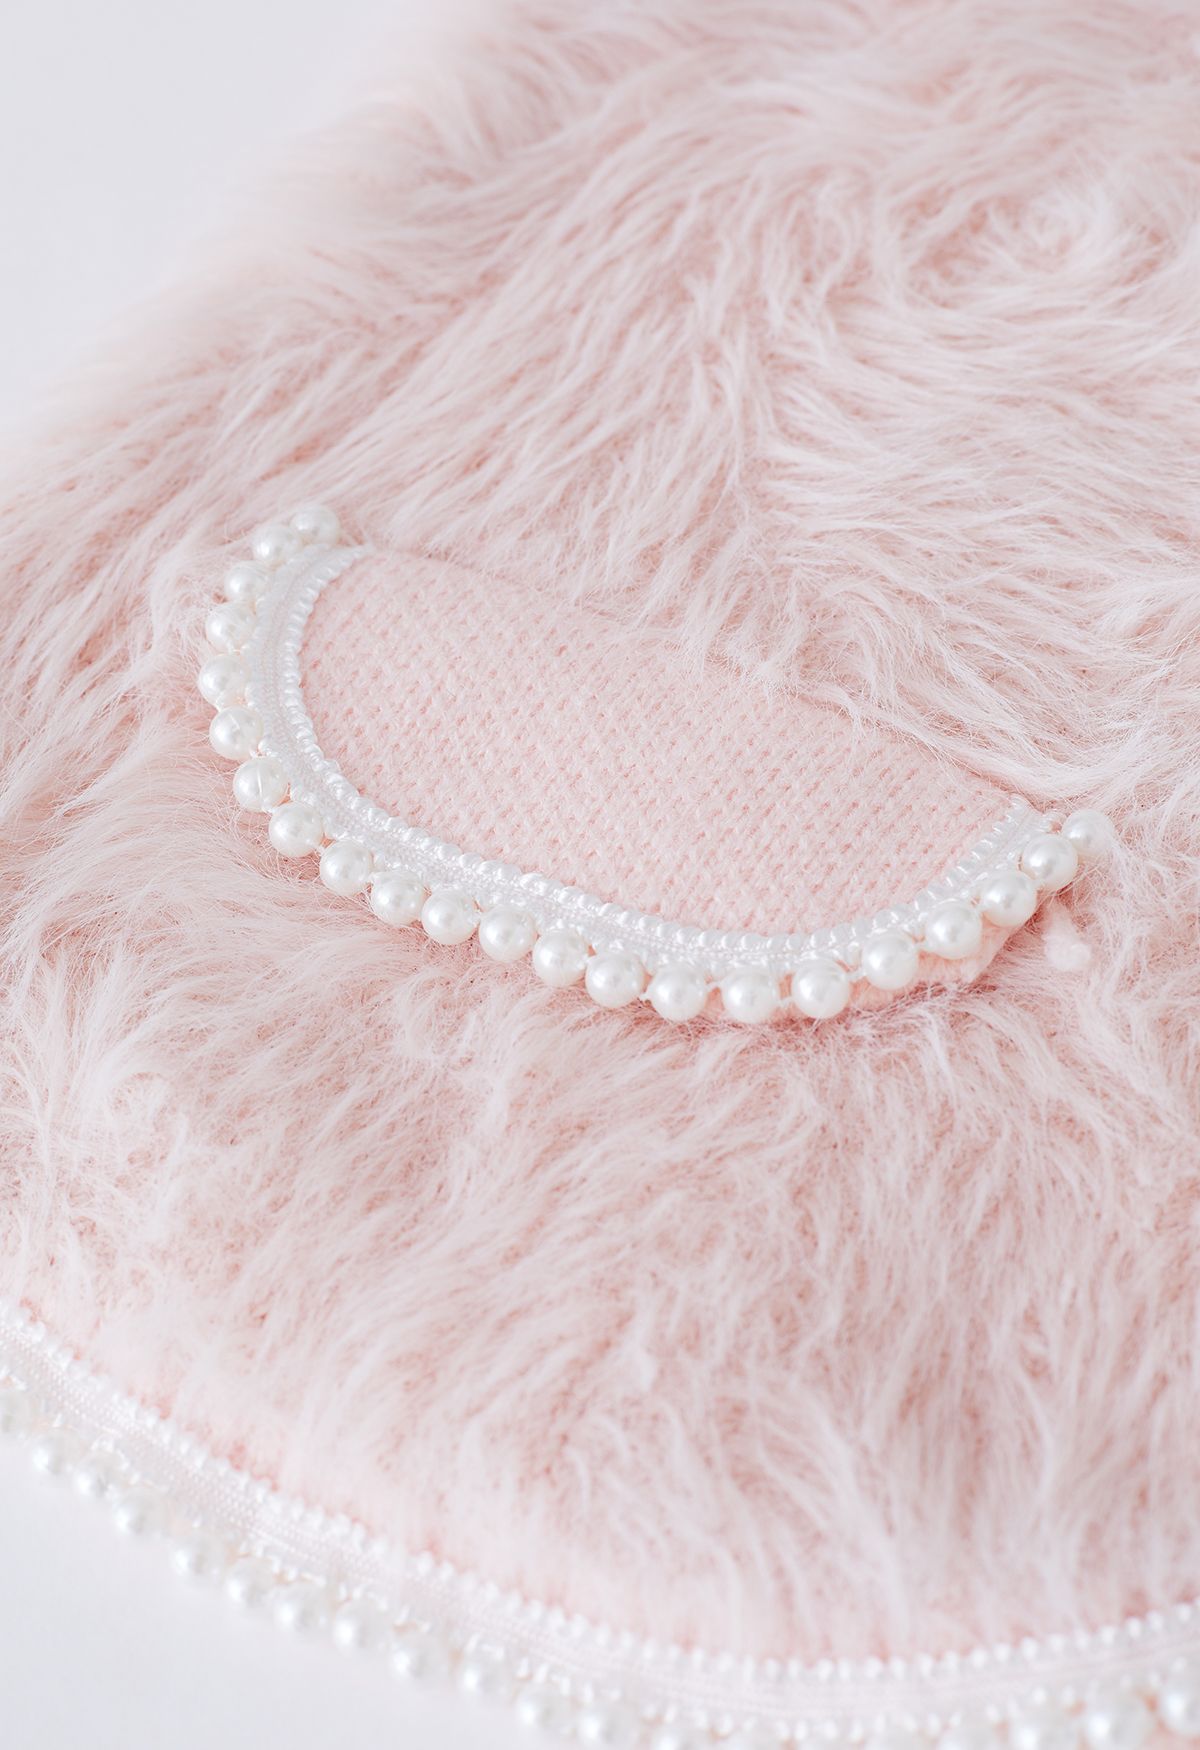 Pearly Faux Fur Knit Cardigan in Pink